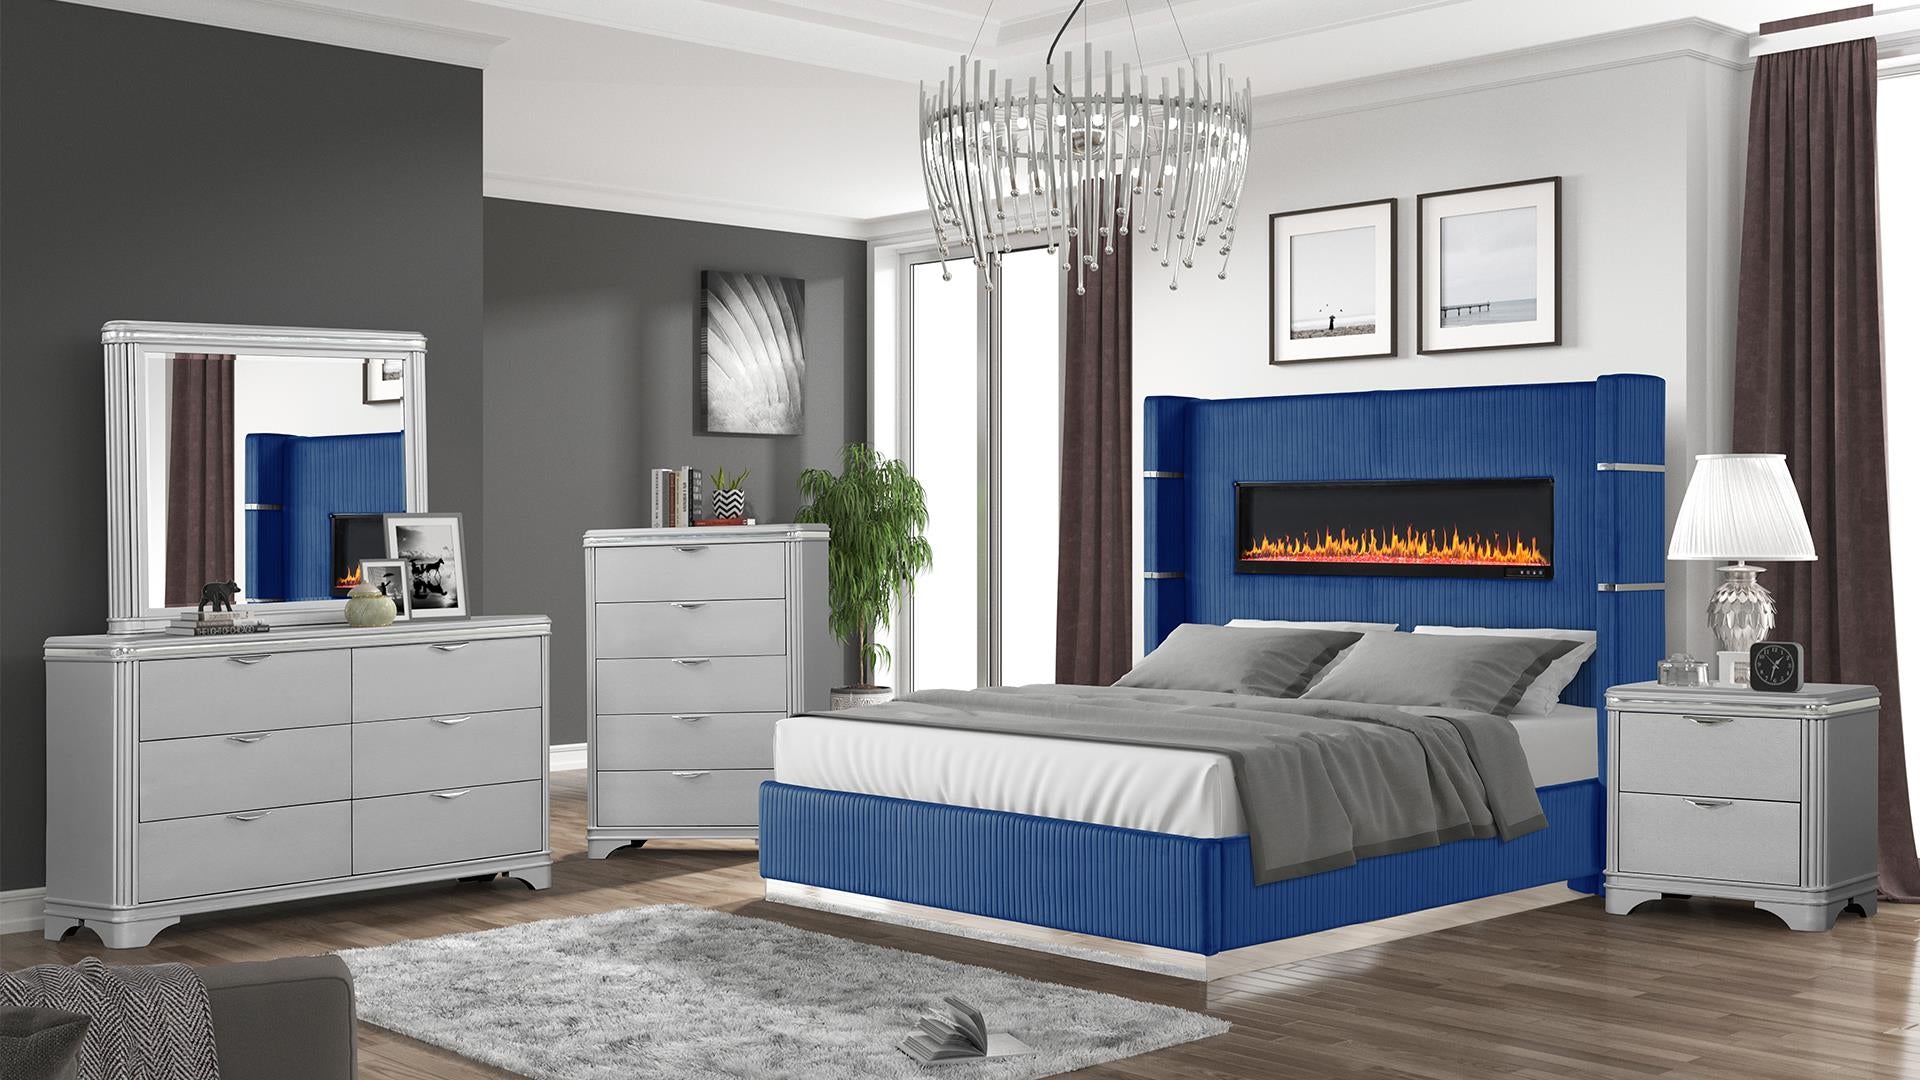 🔥🔥** SANTA MONICA **🔥🔥  🔥FIRE PLACE BED FRAME 🔥 with 🔊🔊 BLUETOOTH 🔊🔊 SPEAKERS…🎶 & USB Charging Ports 🔌